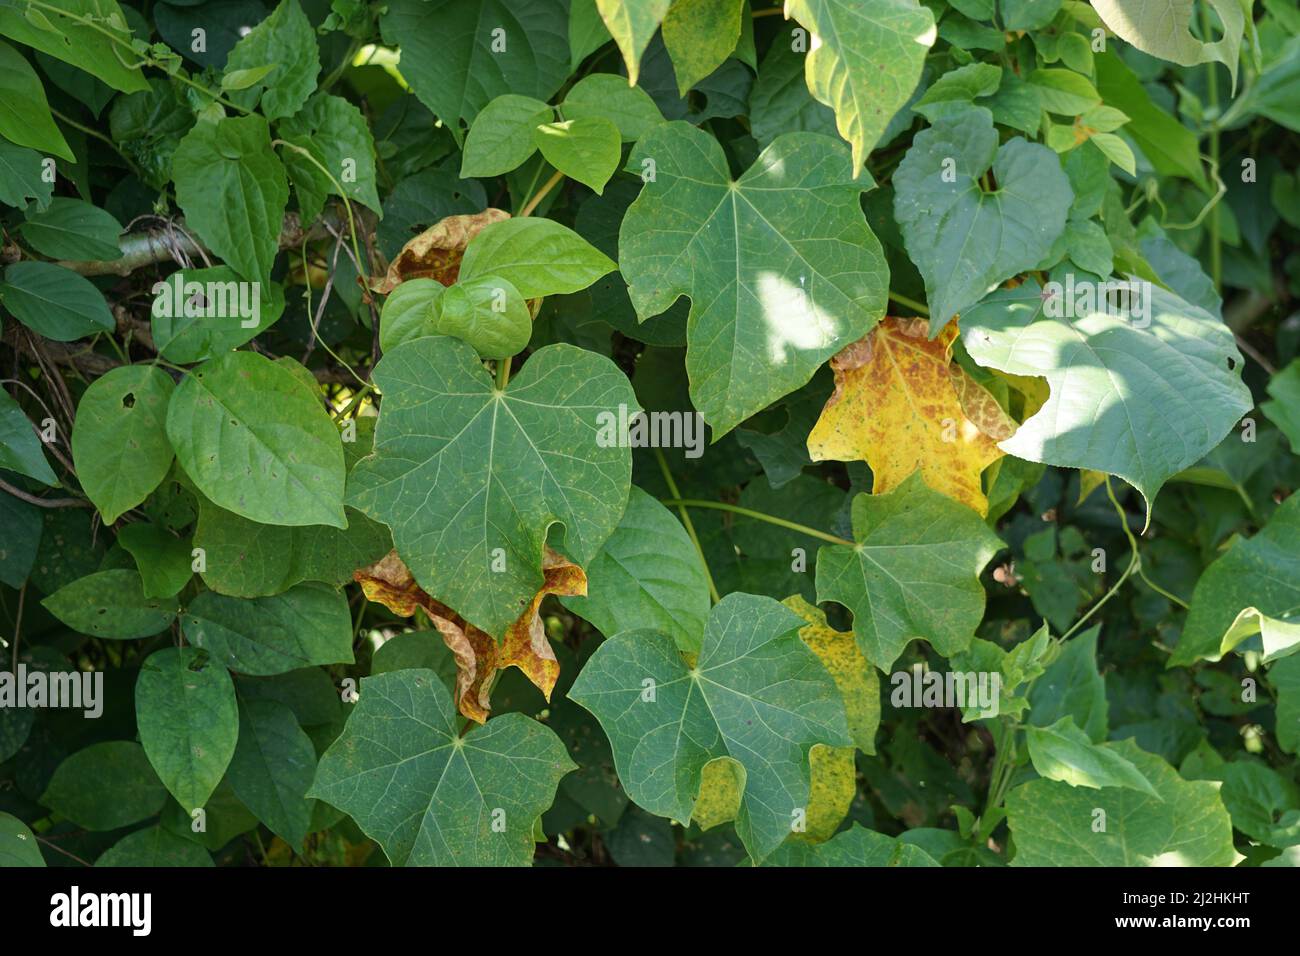 Jatropha curcas (Also called jarak pagar, physic nut, Barbados nut, poison nut, bubble bush) leaves. Indonesian use the latex to stop bleeding Stock Photo